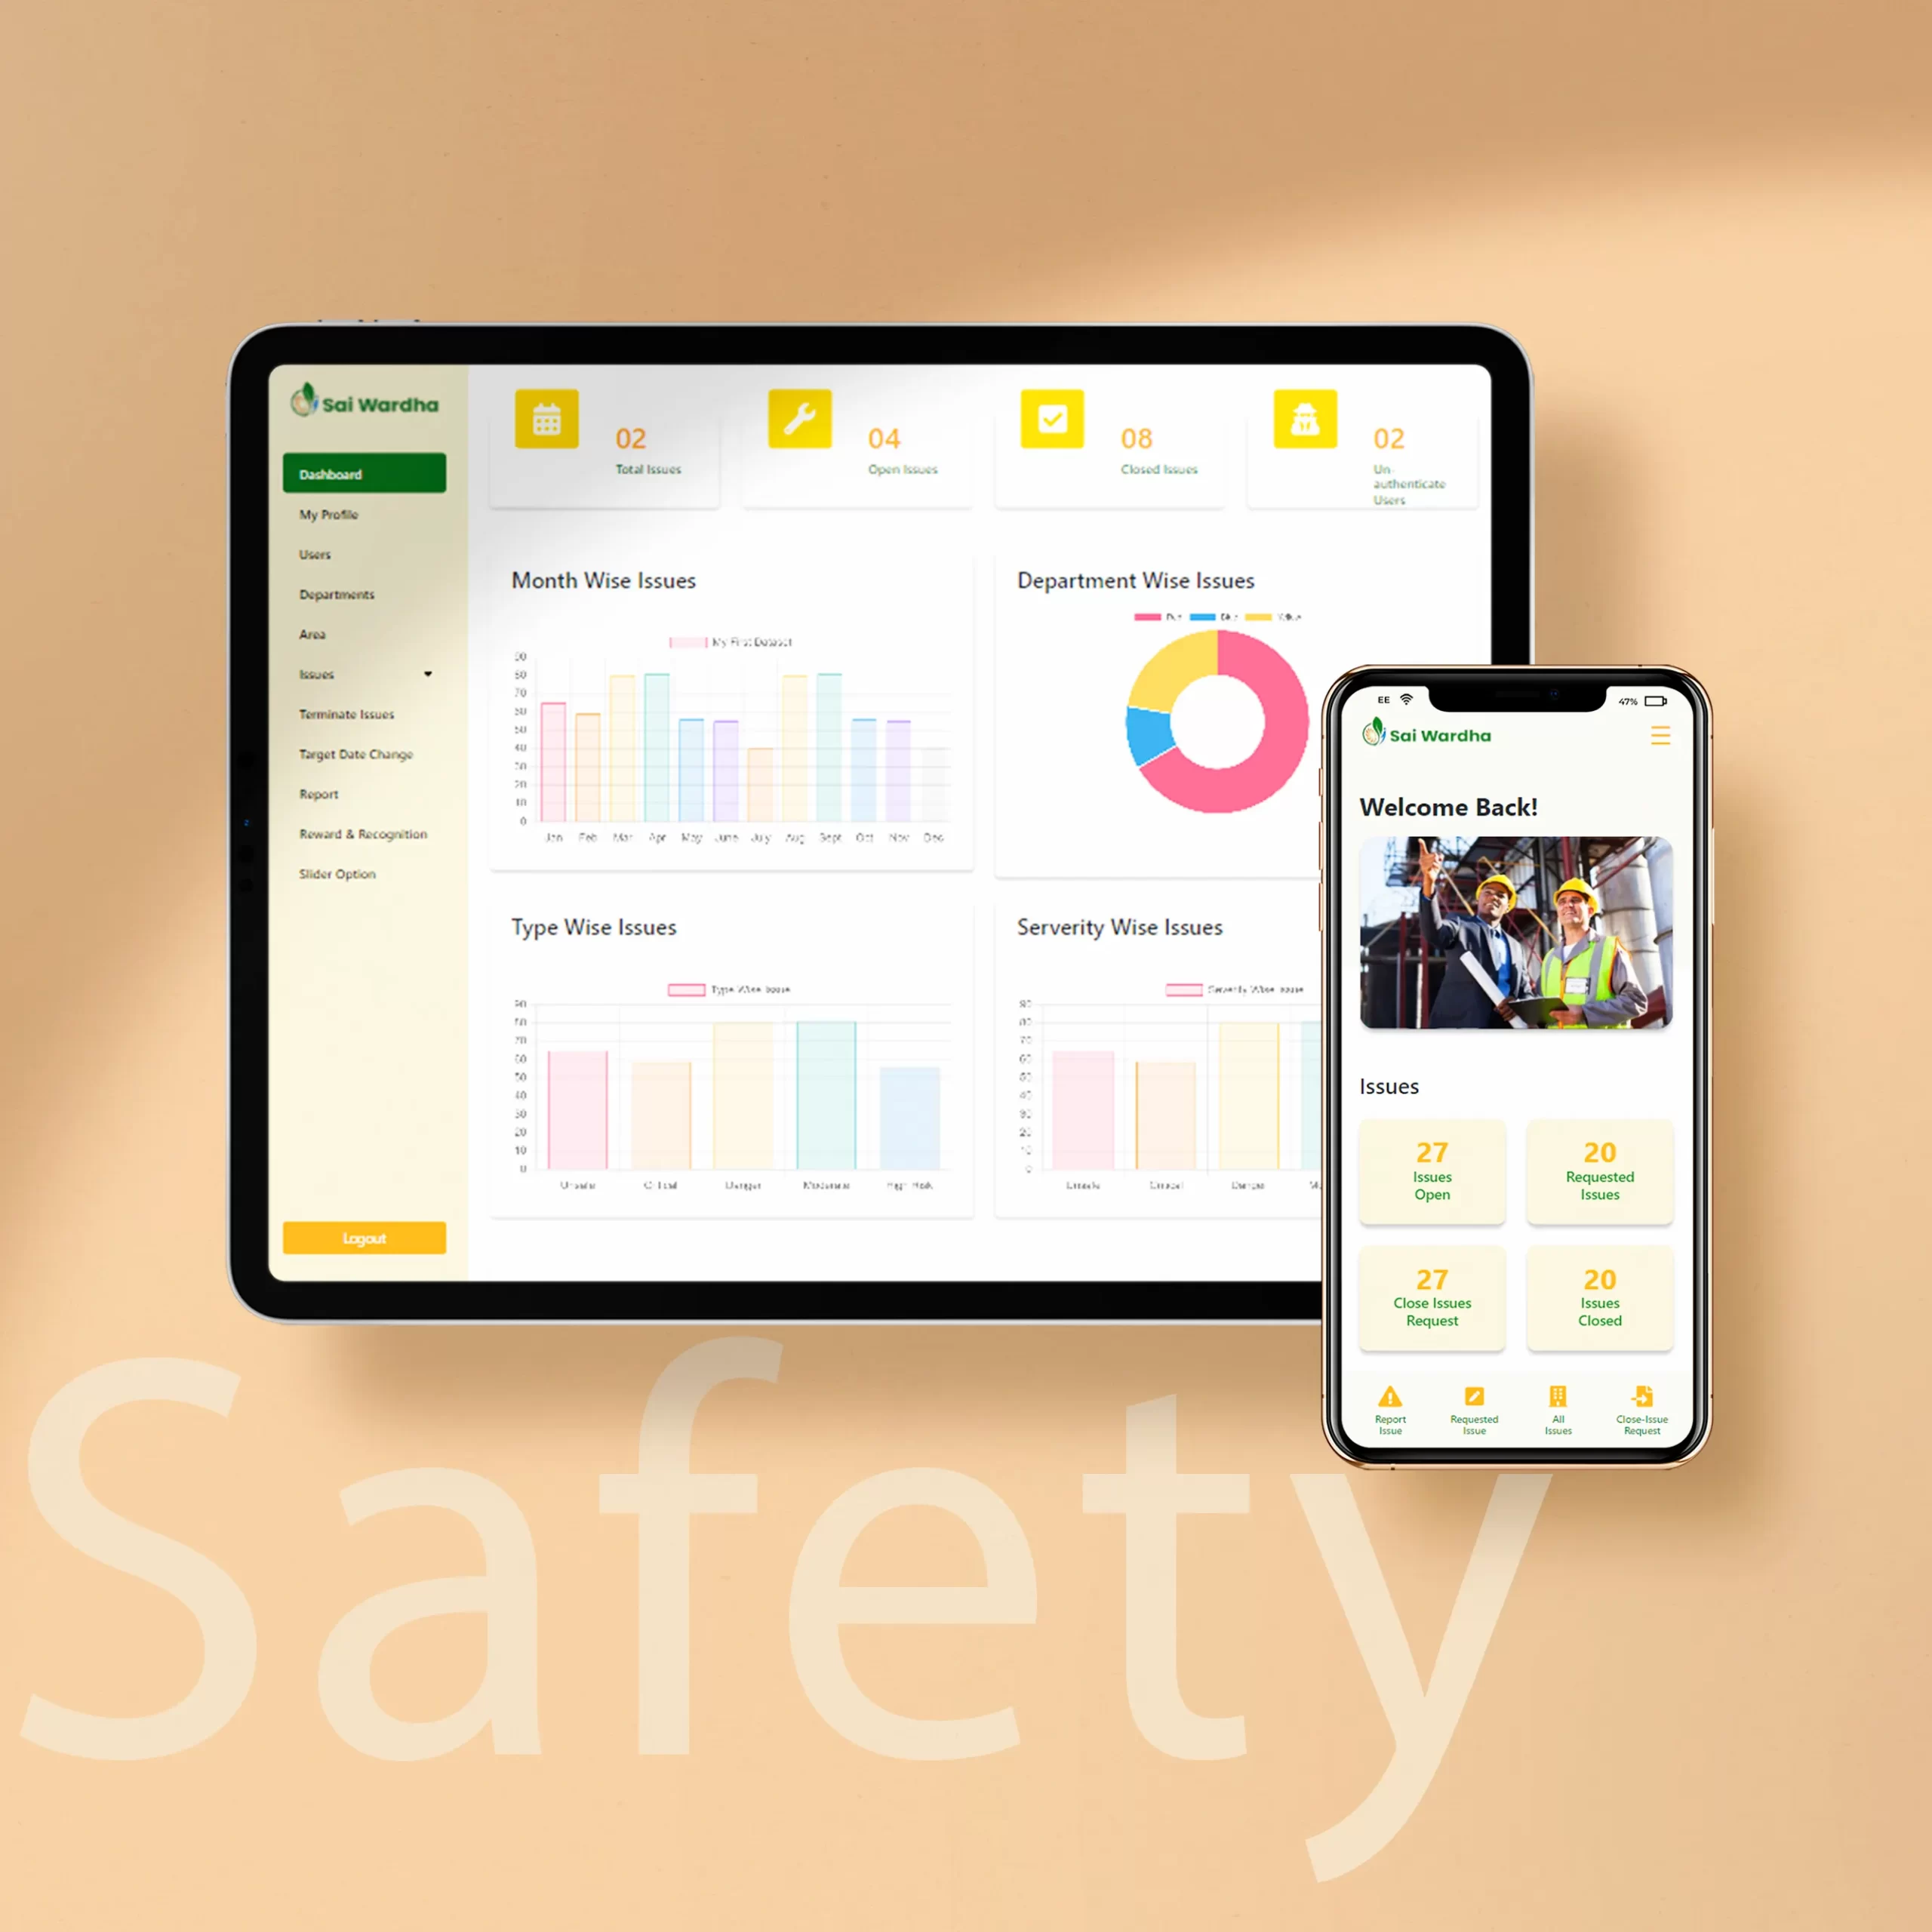 Safety App it projects in raipur chhattisgarh Projects saiwardha safety app scaled